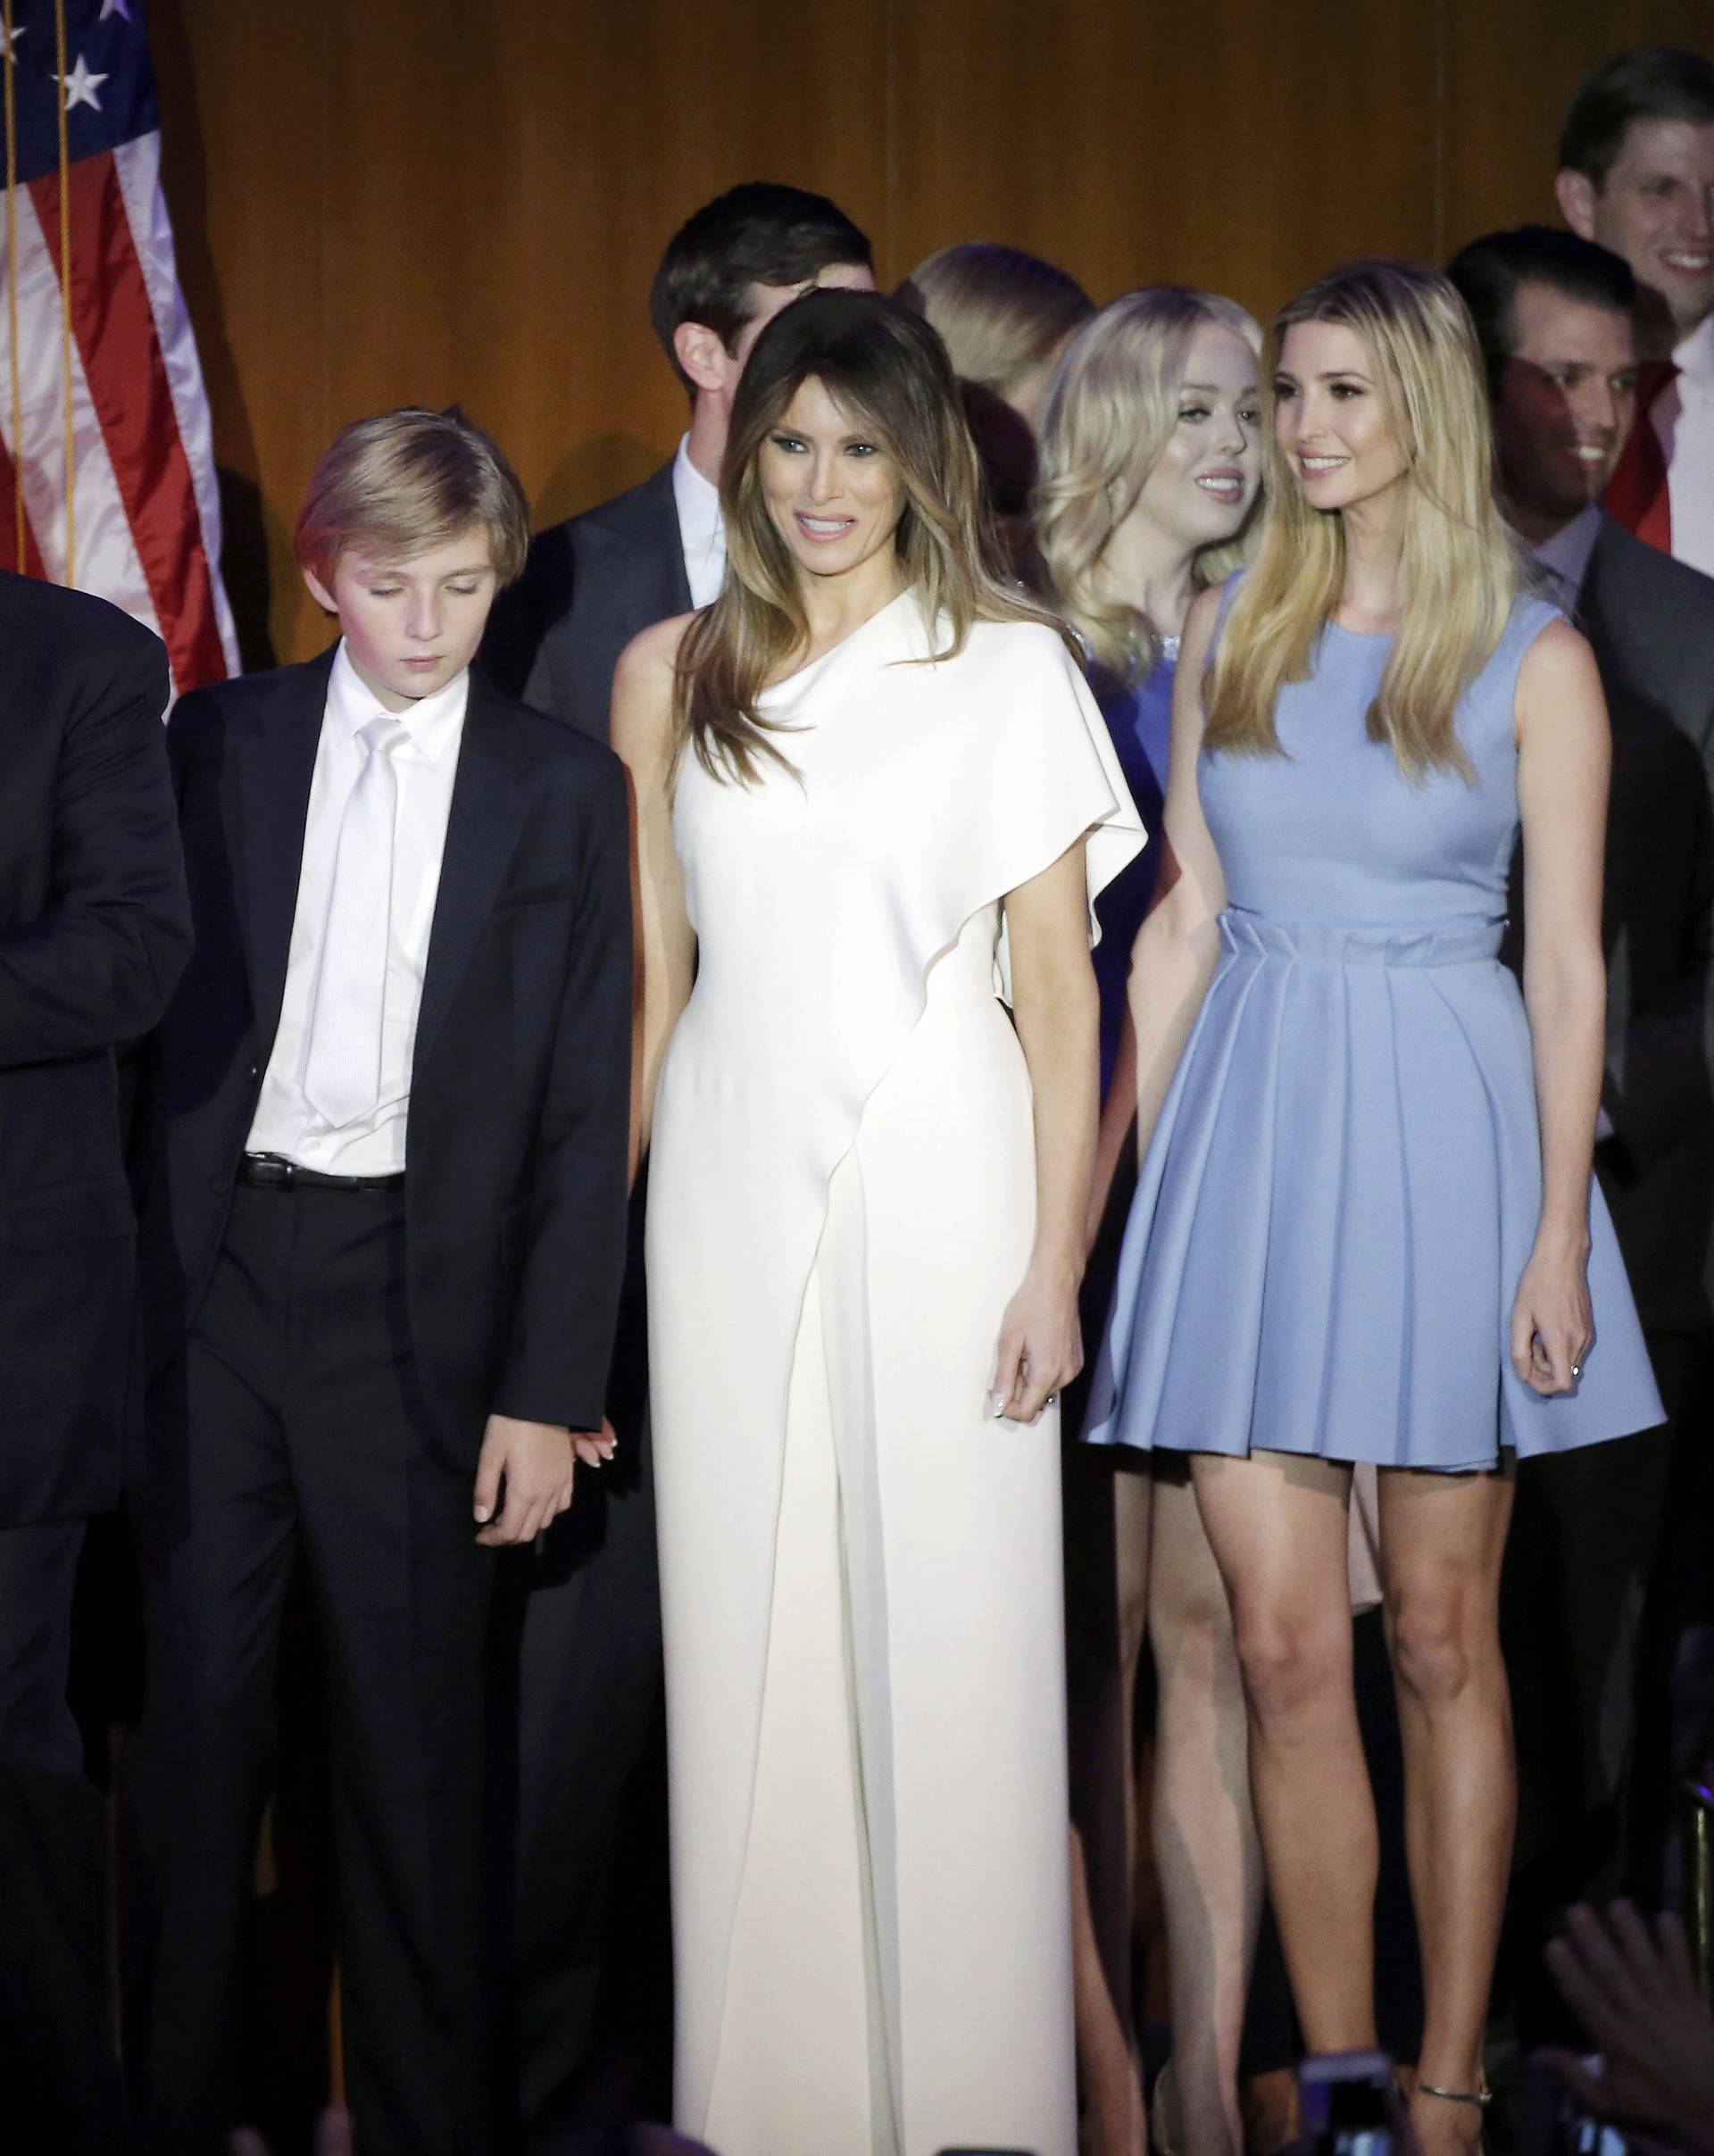 U.S. President-elect Donald Trump, his wife Melania, daughter Ivanka, son Barron and other family members greet supporters during his election night rally in Manhattan